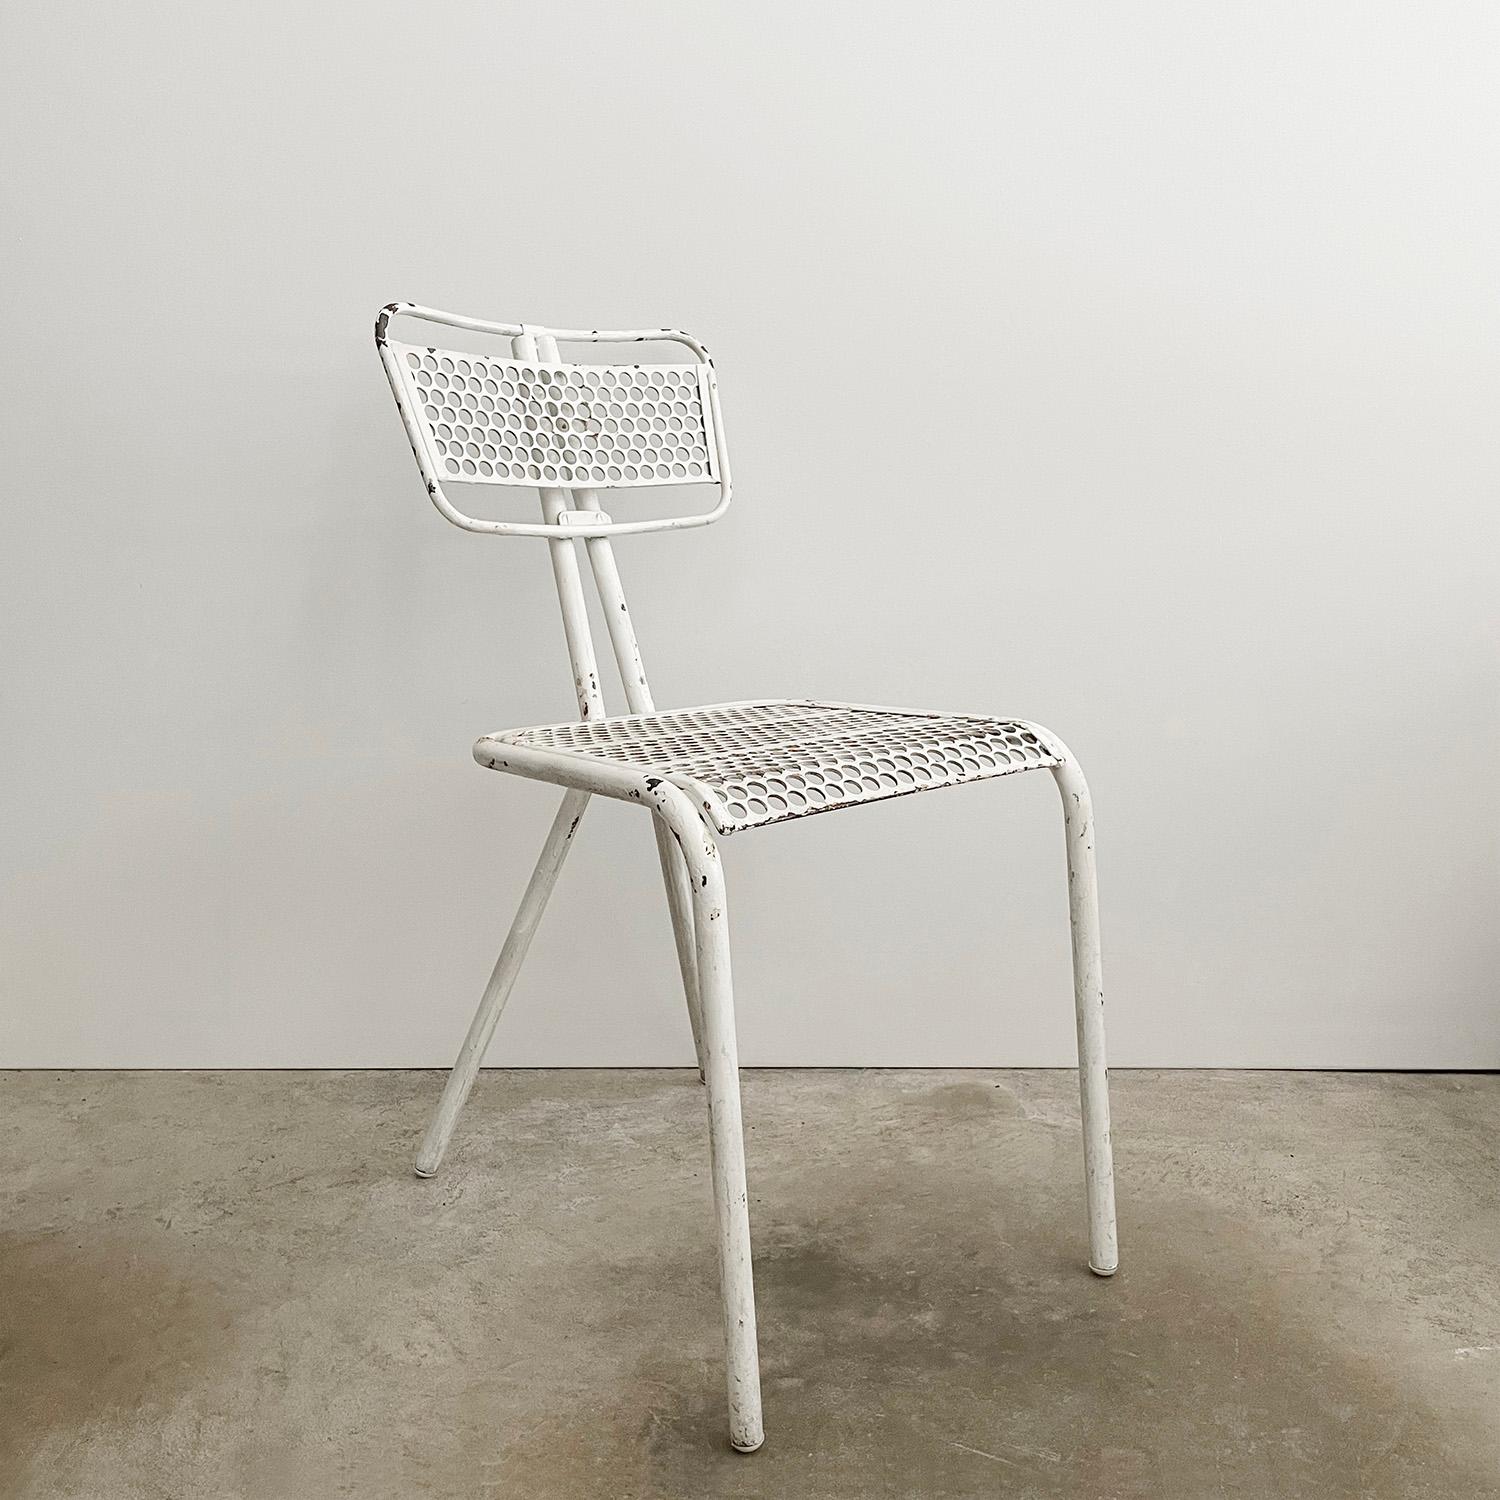 René Malaval for Bloc Metal 
France, post war 
This vintage metal side chair will add wonderful texture and rich history to any room
Composed of perforated metal backrests/seats 
Tubular steel legs 
Surprisingly comfortable
Unique architectural